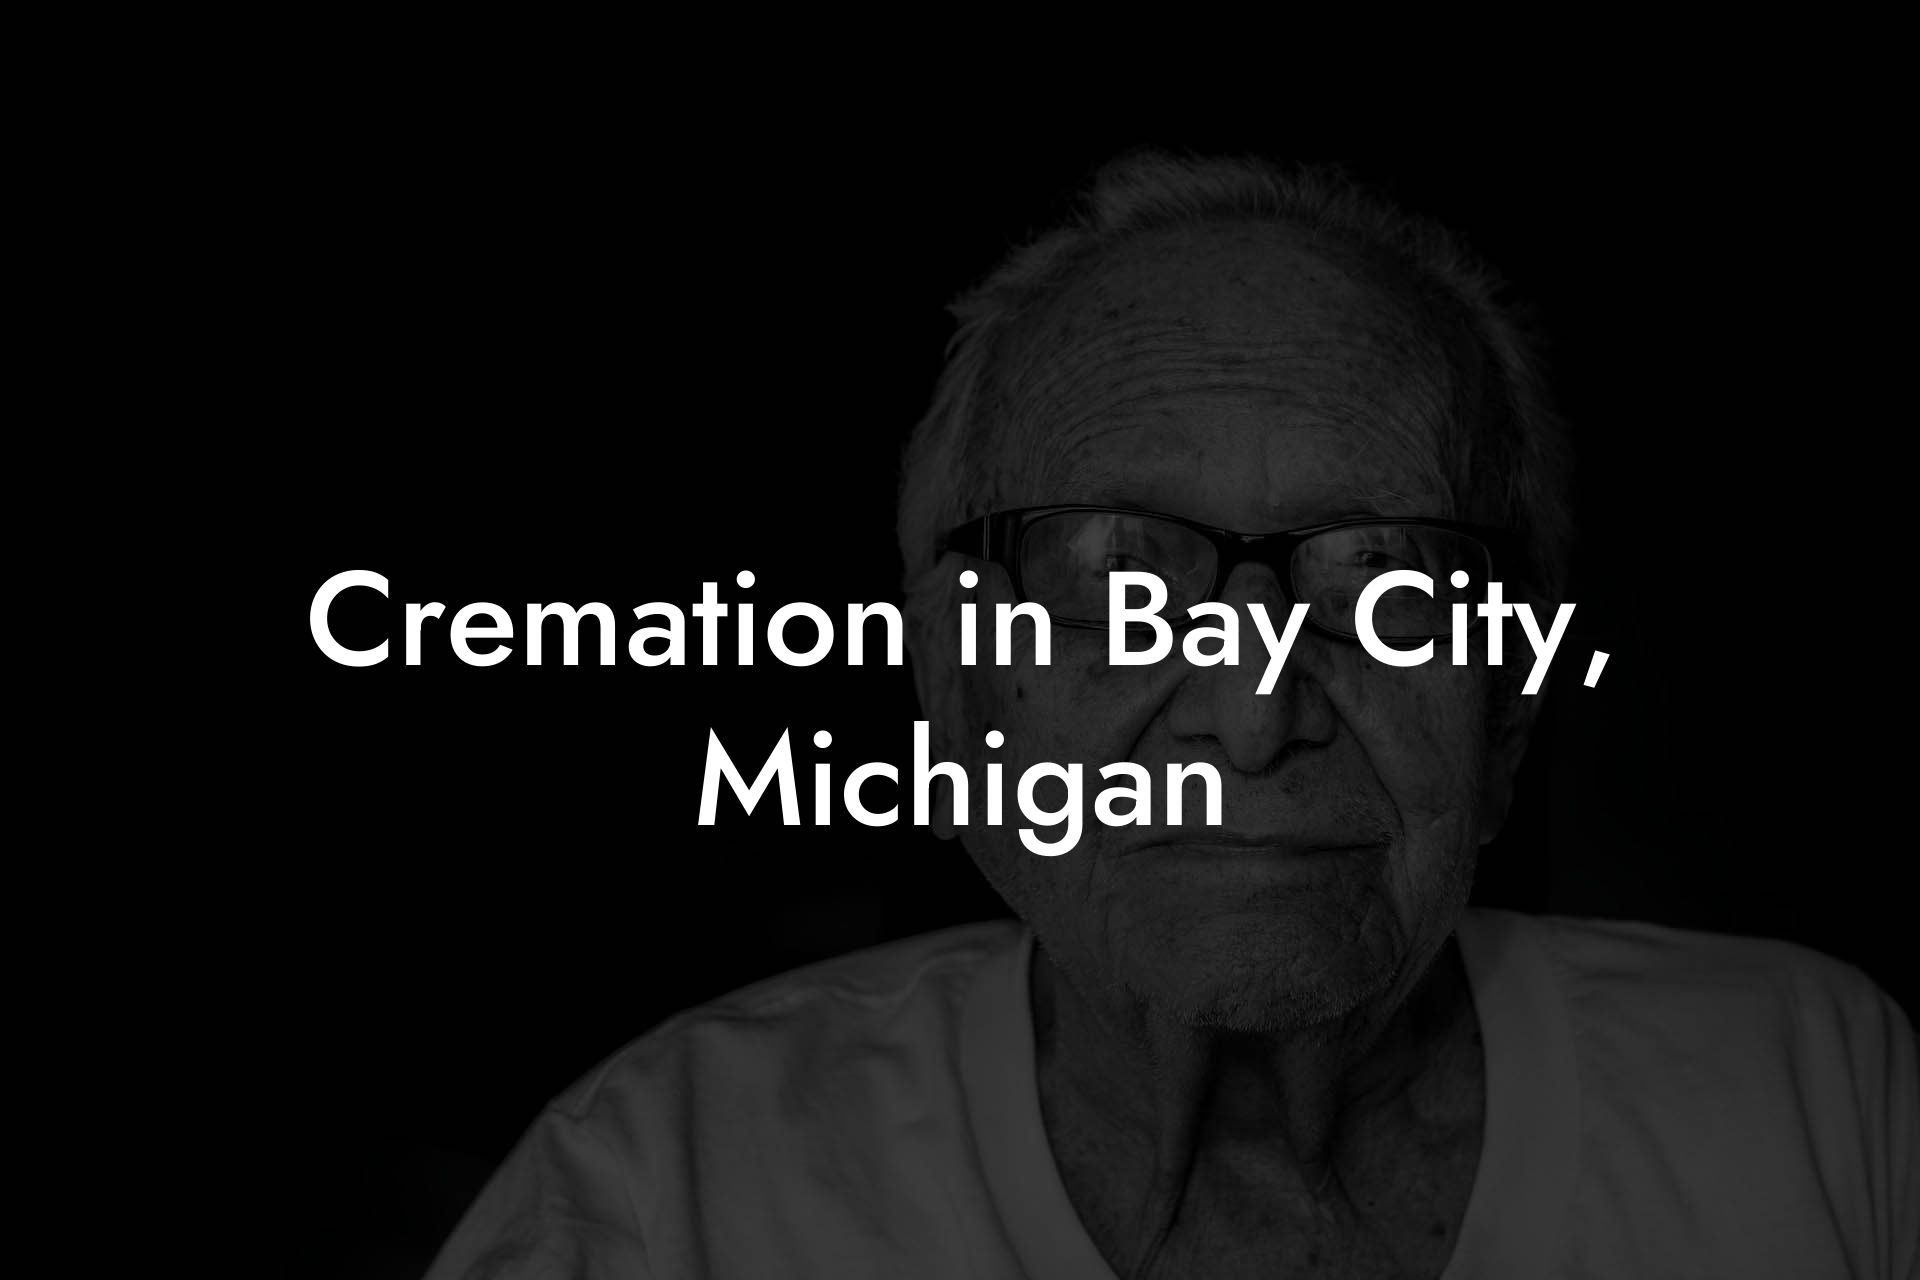 Cremation in Bay City, Michigan